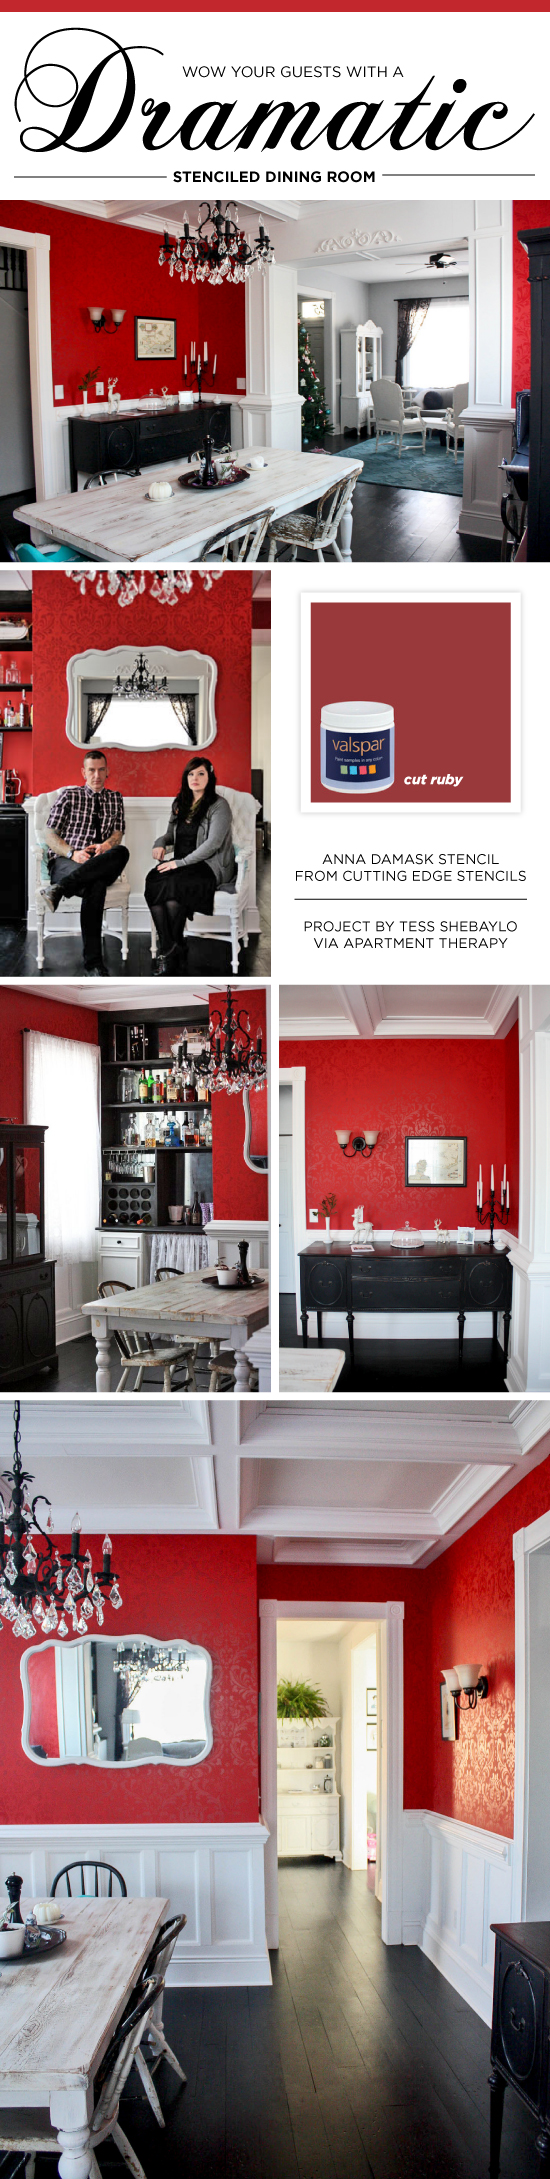 Cutting Edge Stencils shares a DIY bold red stenciled dining room featuring the Anna Damask Stencil. http://www.cuttingedgestencils.com/damask-stencil.html